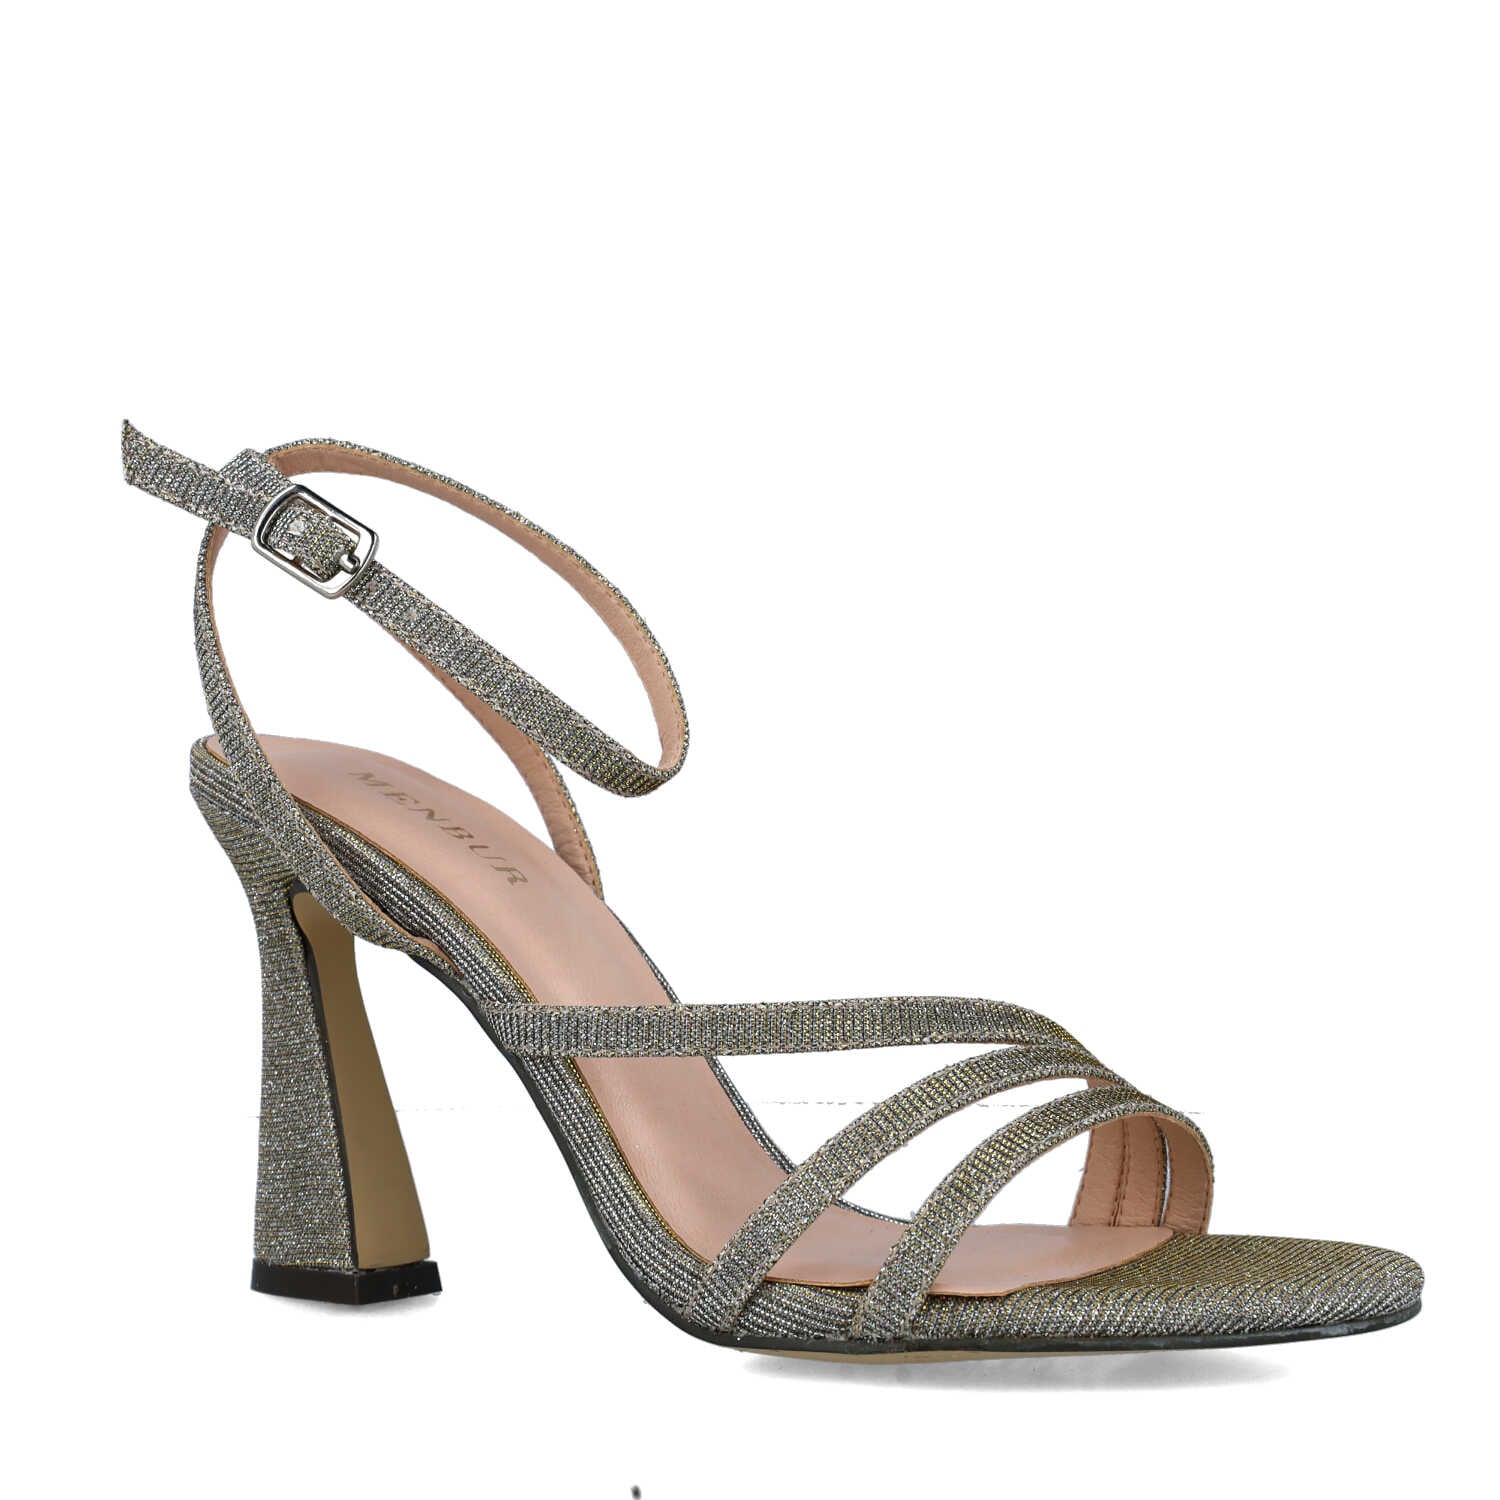 Gray High-Heel Sandals With Ankle-Strap